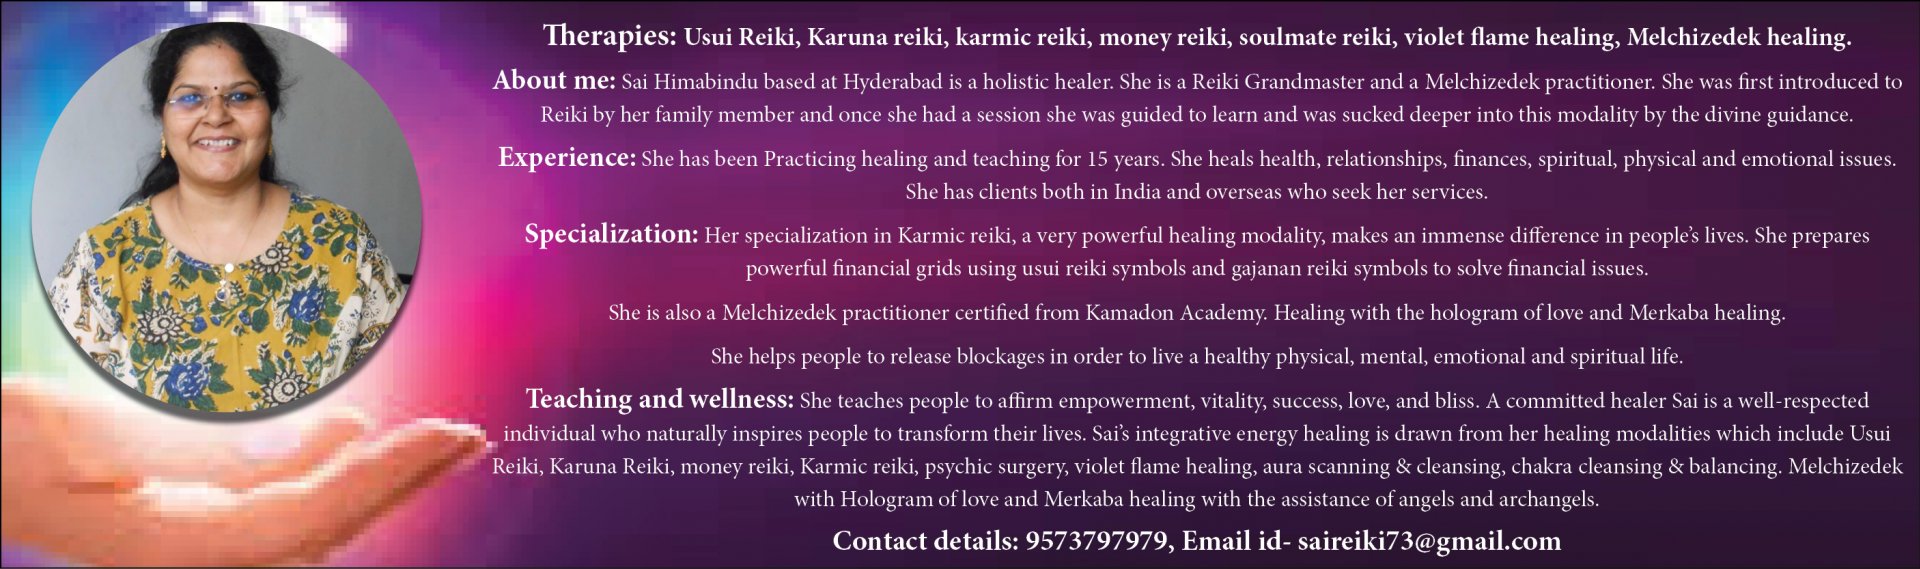 Sai Himabindu based at Hyderabad is a holistic healer. She is a Reiki Grandmaster and a Melchizedek practitioner. 